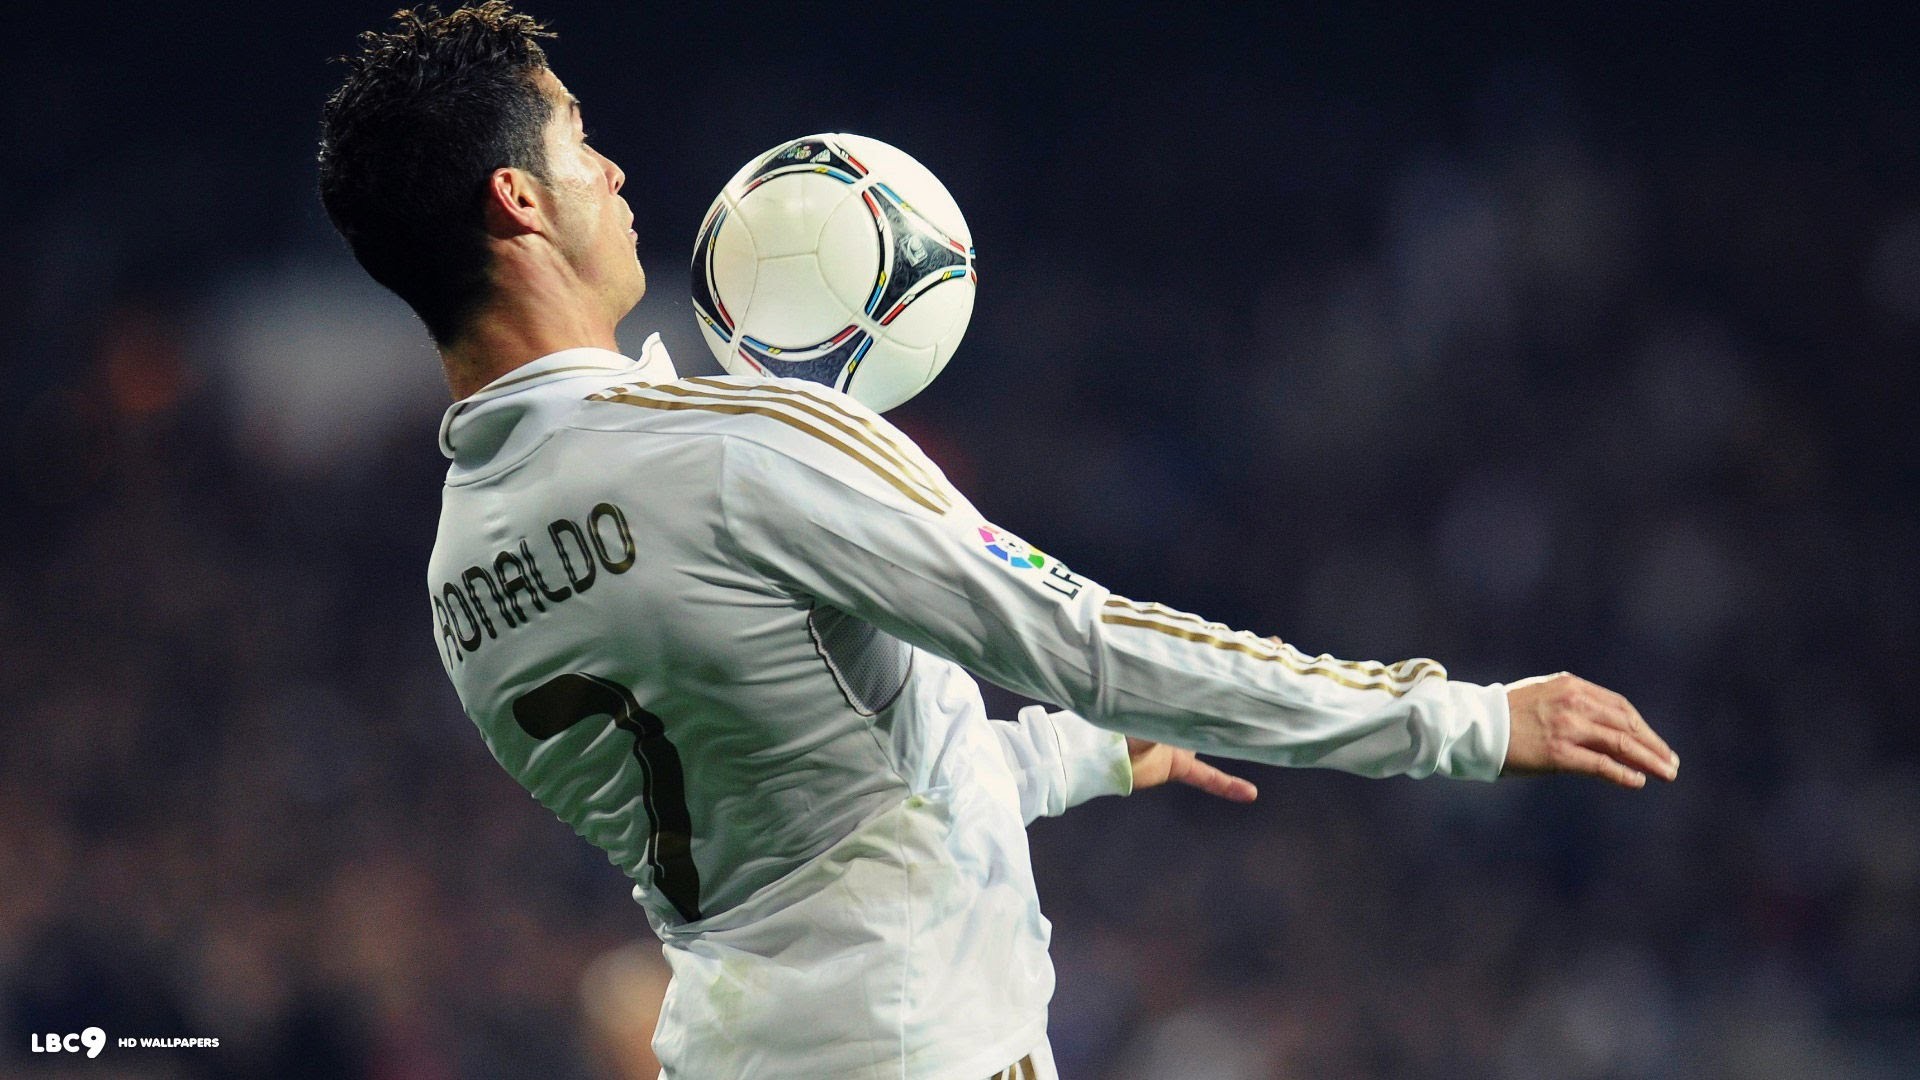 cr7 hd wallpapers 1080p,sports equipment,player,championship,sports,football player